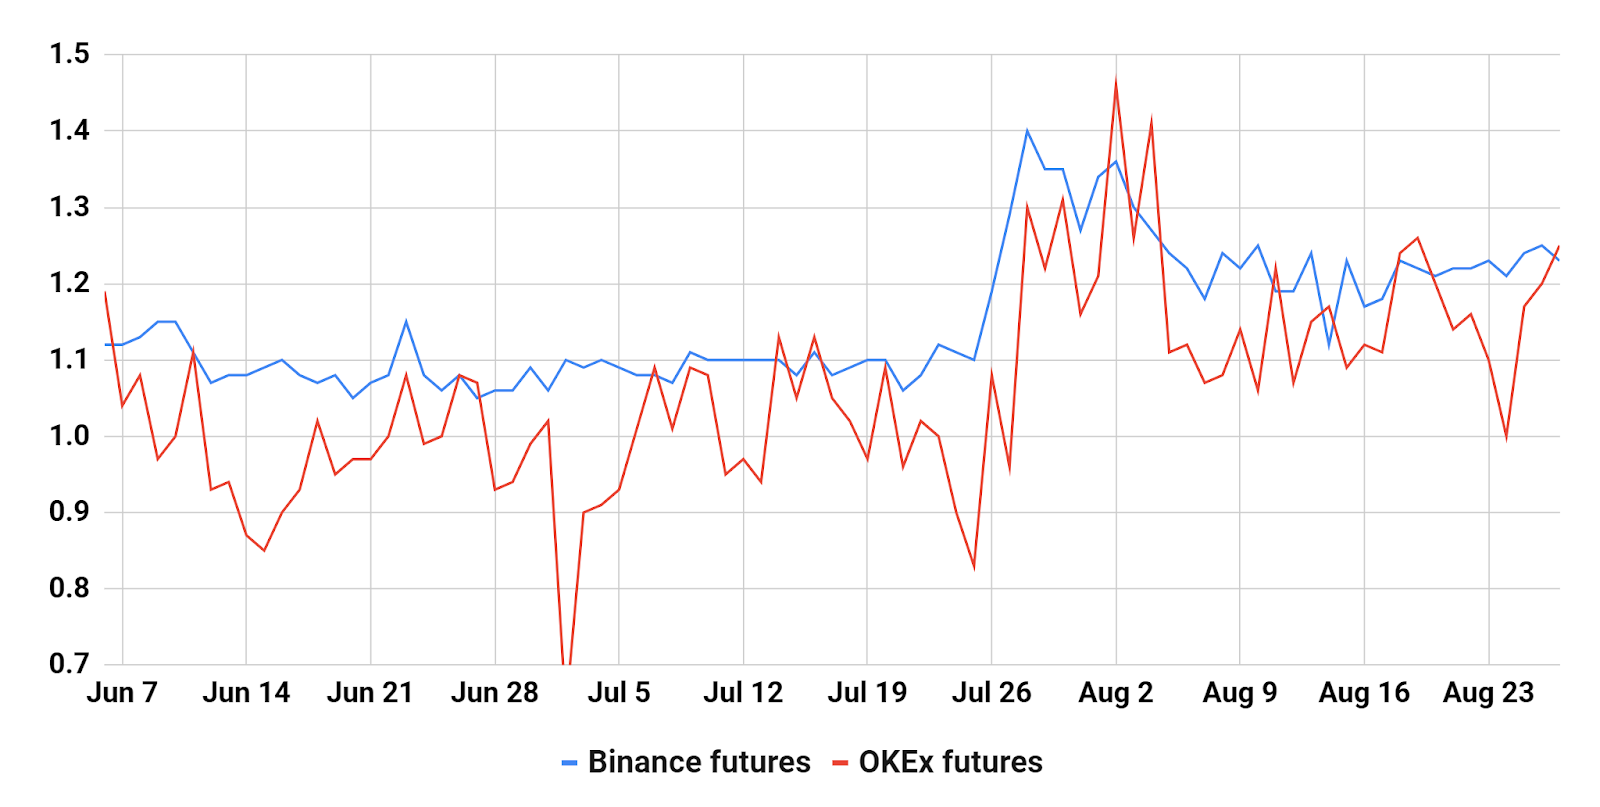 Top traders longs/shorts. Source: Binance, OKEx, and Cointelegraph